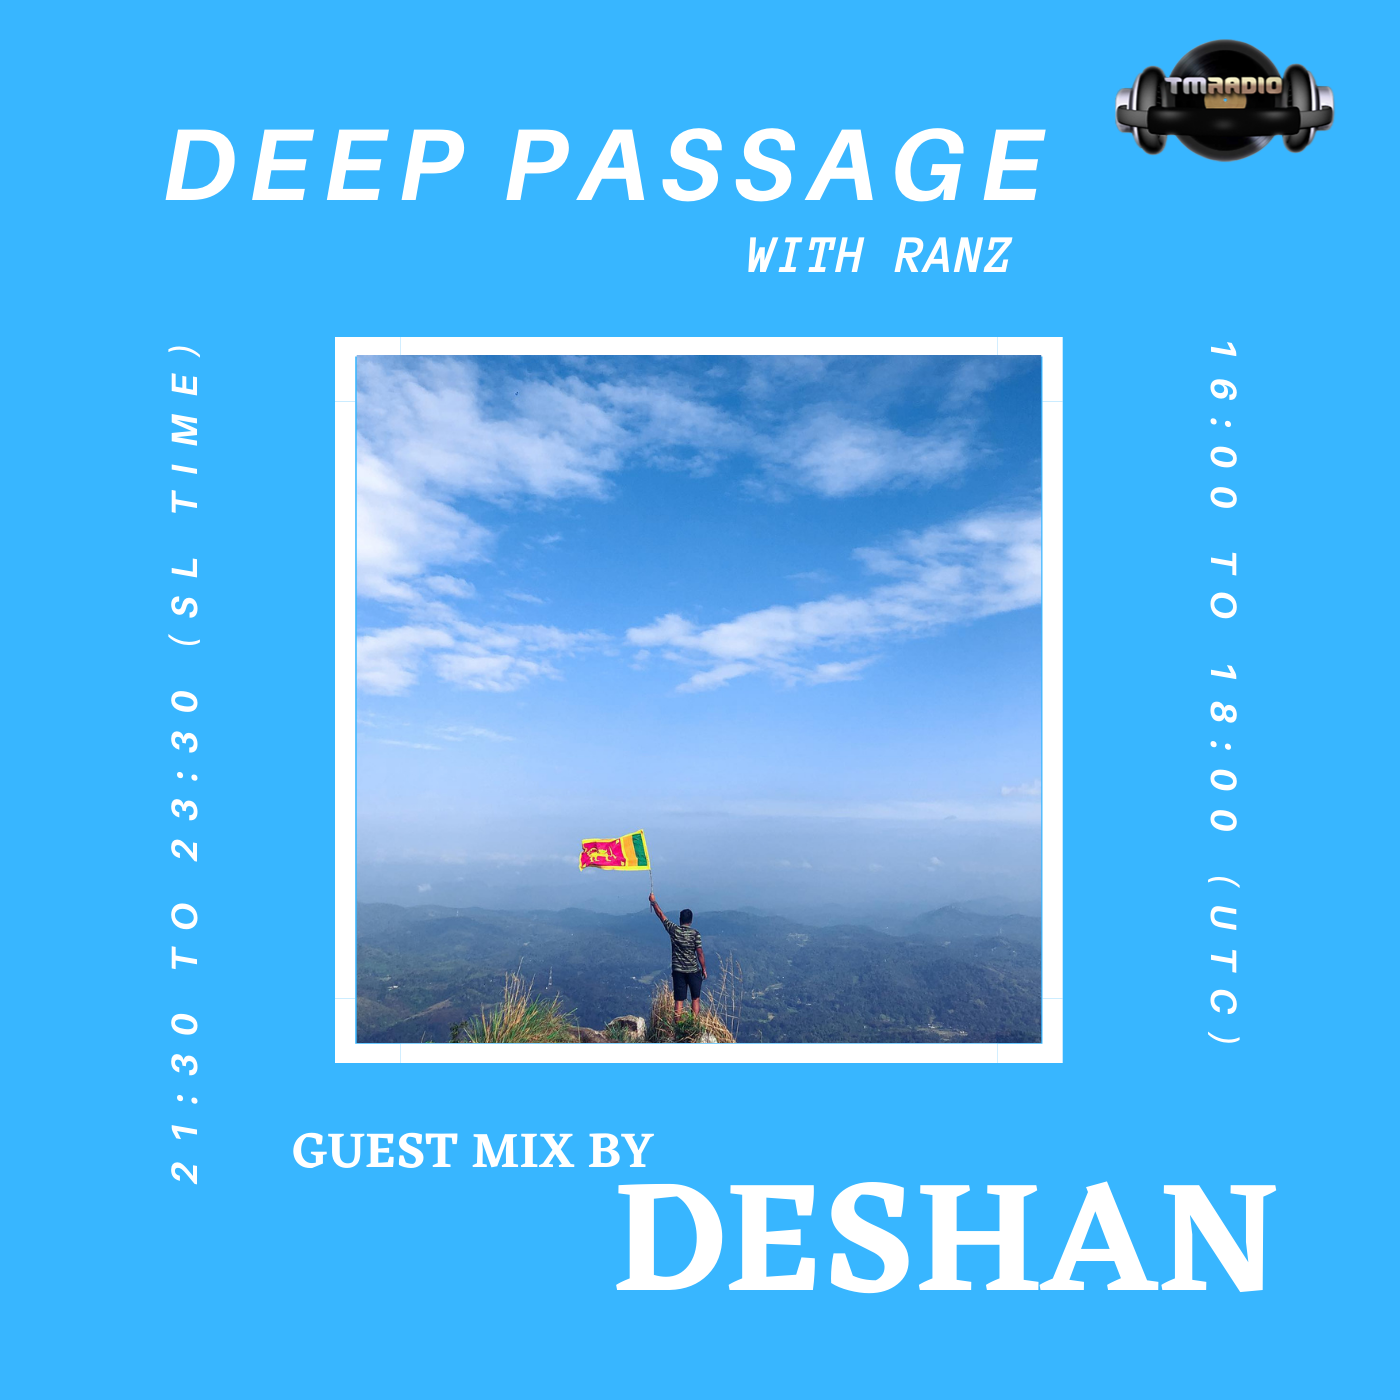 DEEP PASSAGE WITH RANZ | TM RADIO SHOW | EP 042 | Guest mix by DESHAN (Sri Lanka) (from October 18th, 2021)